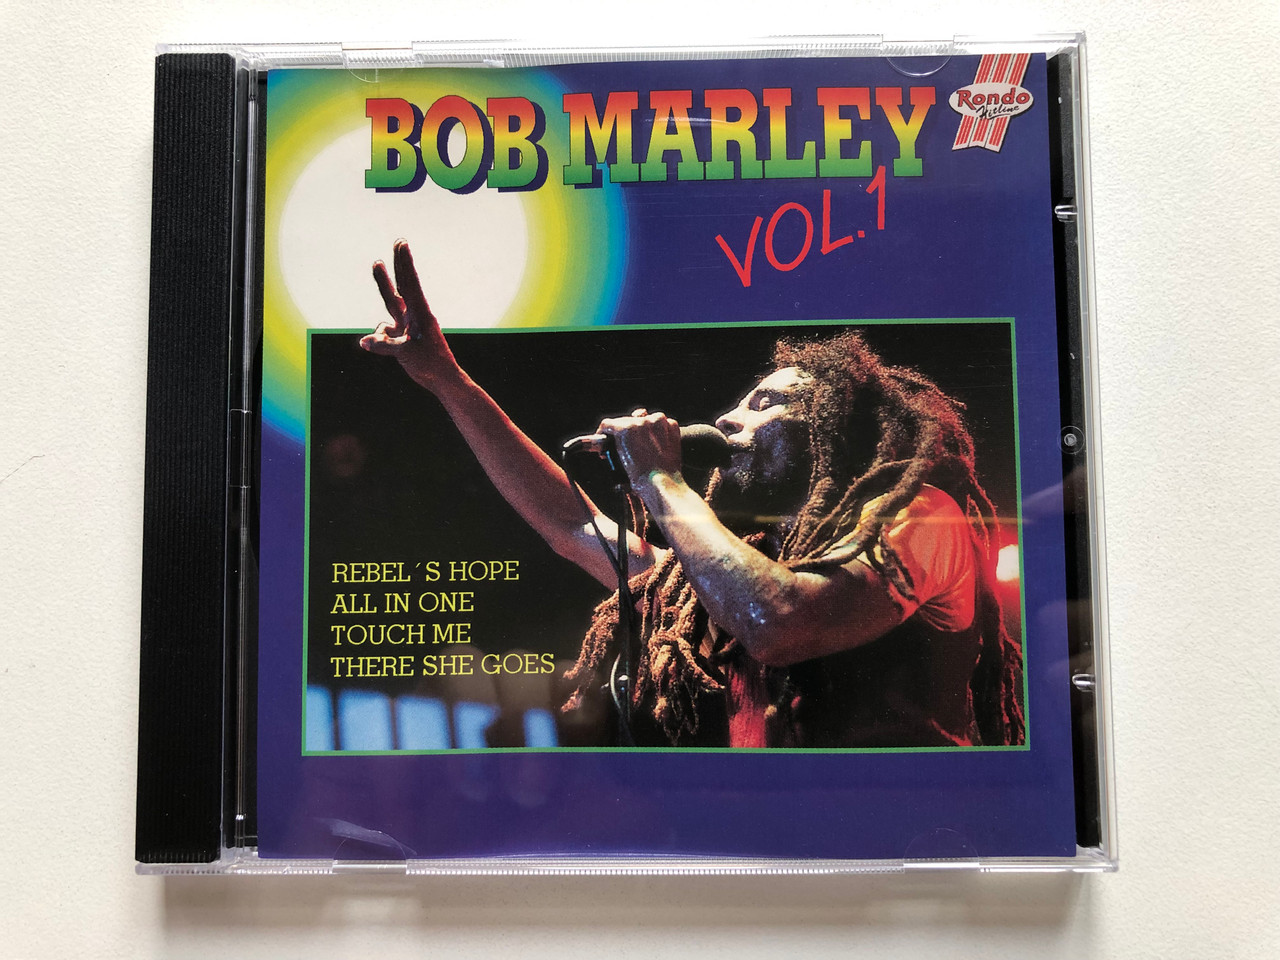 https://cdn10.bigcommerce.com/s-62bdpkt7pb/products/0/images/307553/Bob_Marley_Vol._1_-_Rebels_Hope_All_In_One_Touch_Me_There_She_Goes_Rondo_Hitline_Audio_CD_1994_22098_1__65542.1698742329.1280.1280.JPG?c=2